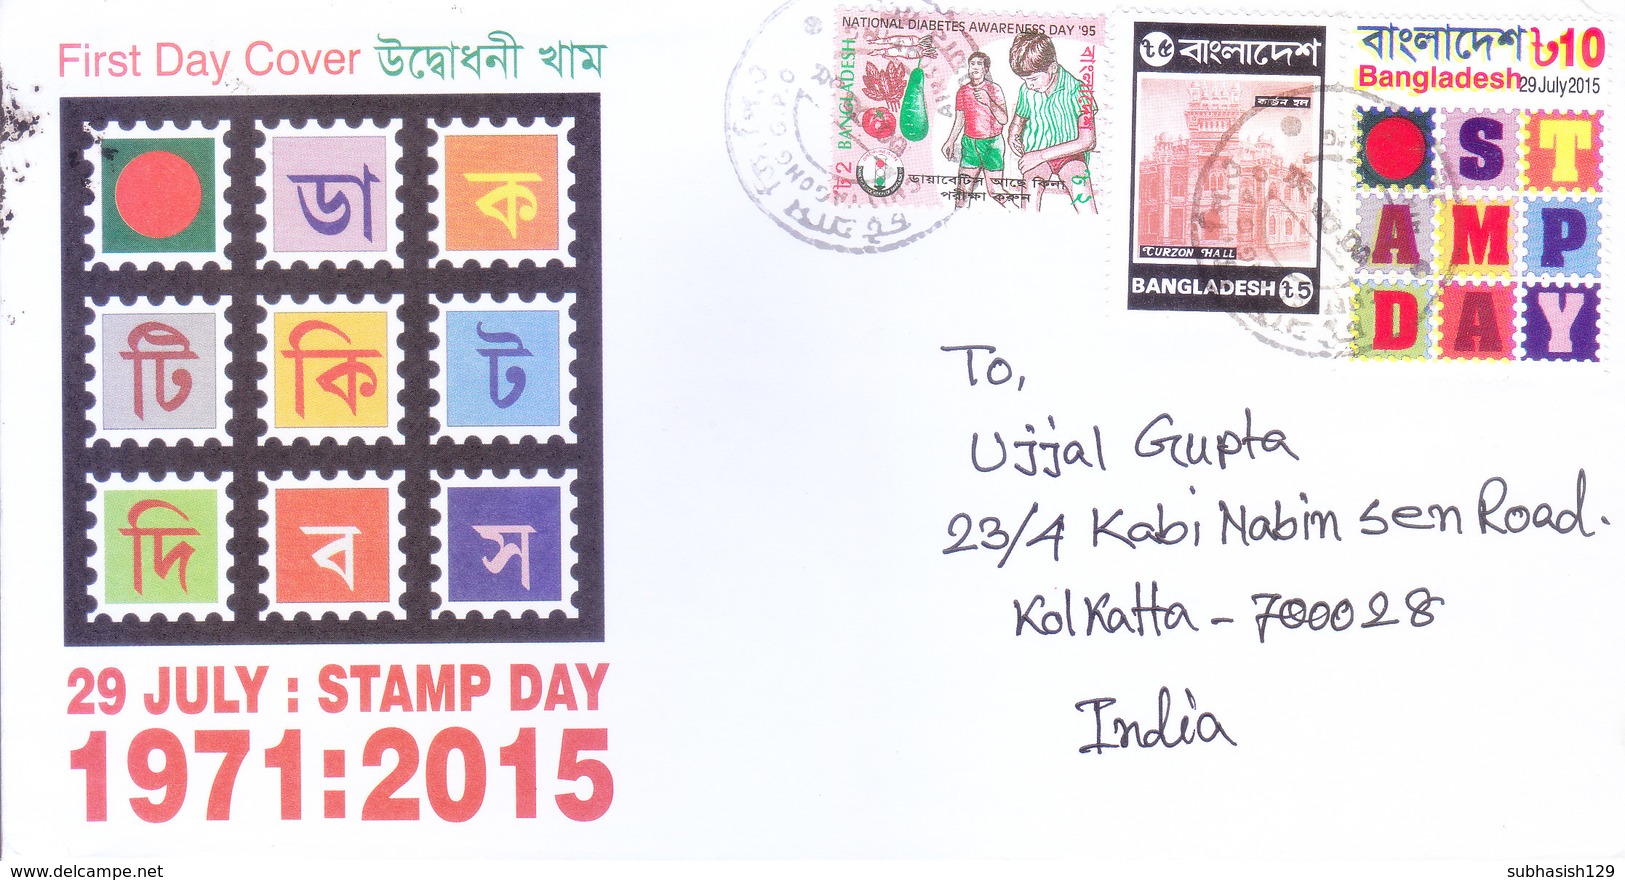 BANGLADESH - 29-07-2015 STAMP DAY FIRST DAY COVER COMMERCIALLY SENT TO INDIA - Bangladesh